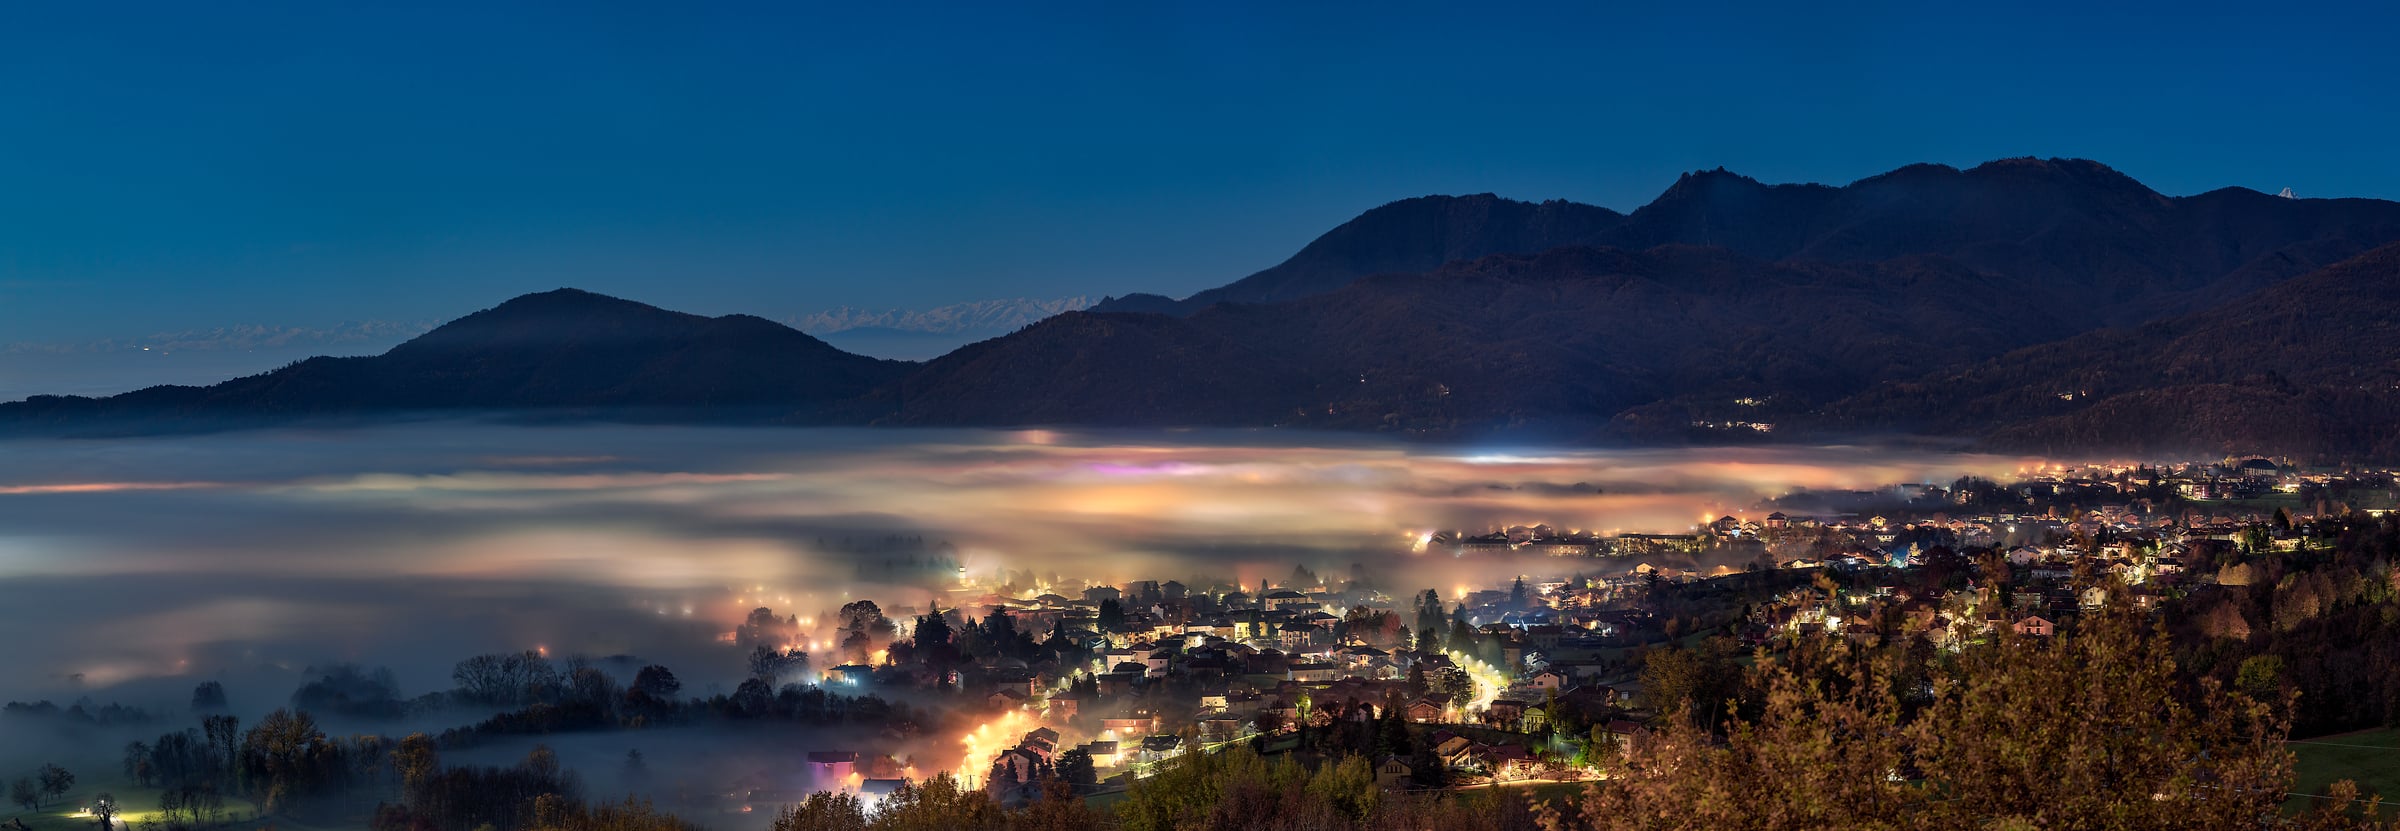 203 megapixels! A very high resolution, large-format VAST photo print of Giaveno, Turin, Italy at night with fog and mountains; photograph created by Duilio Fiorille.